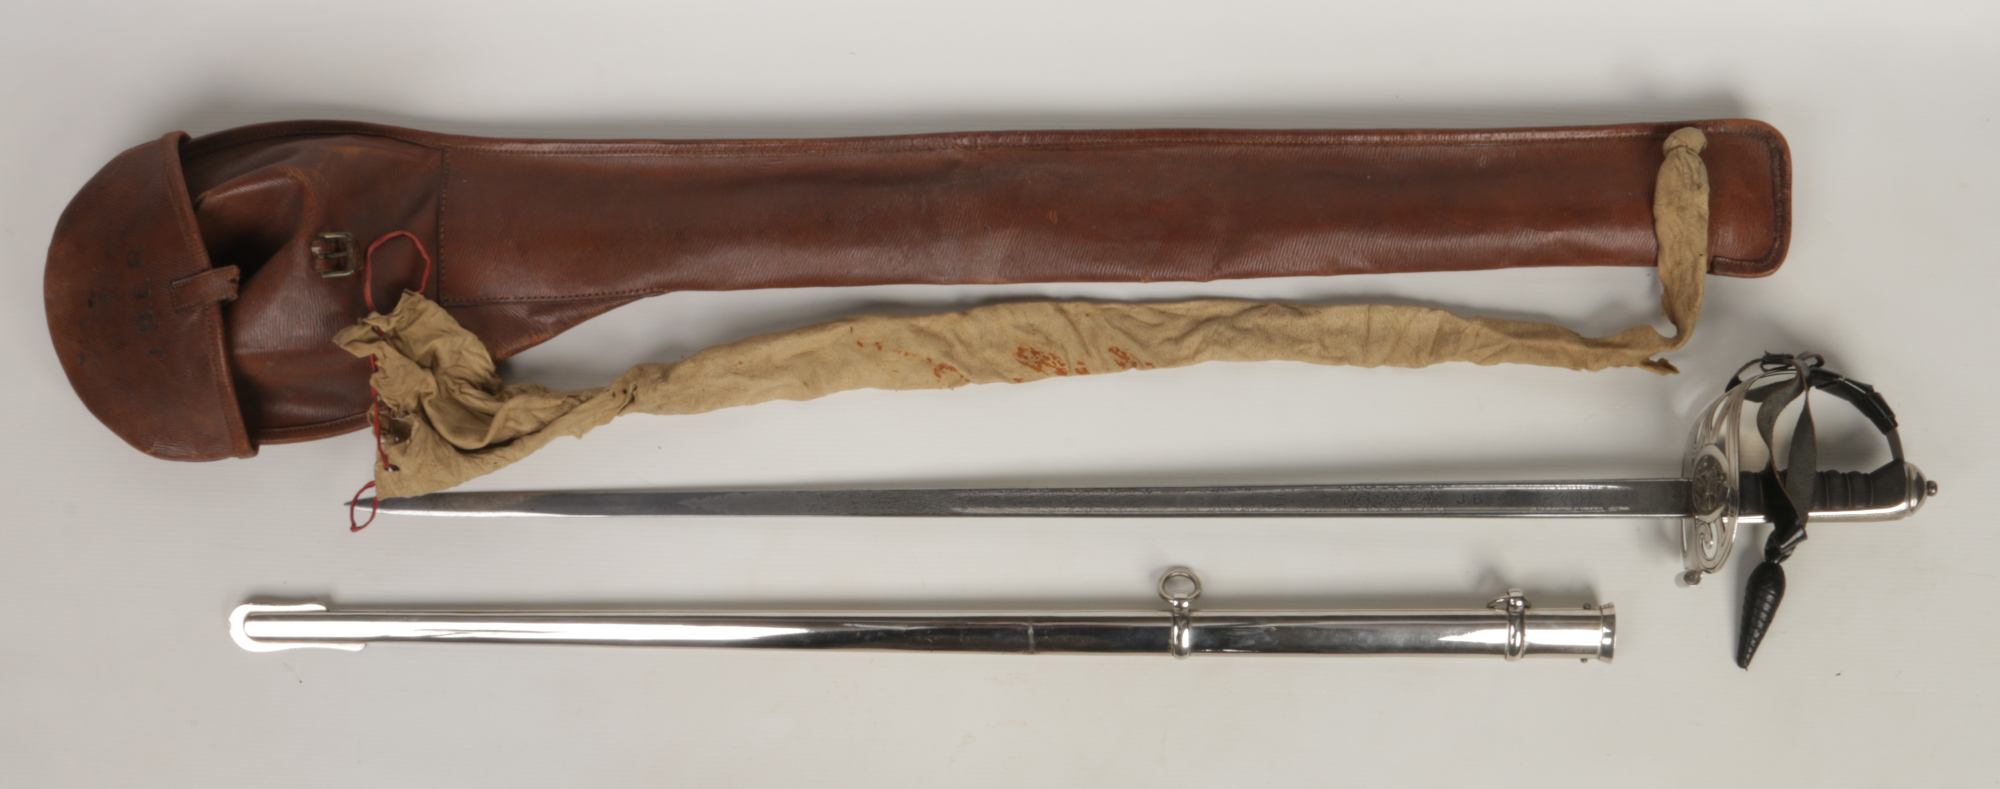 A George V 1827 pattern Royal Rifle Corps. Officers sword by Wilkinson Sword, London. With etched